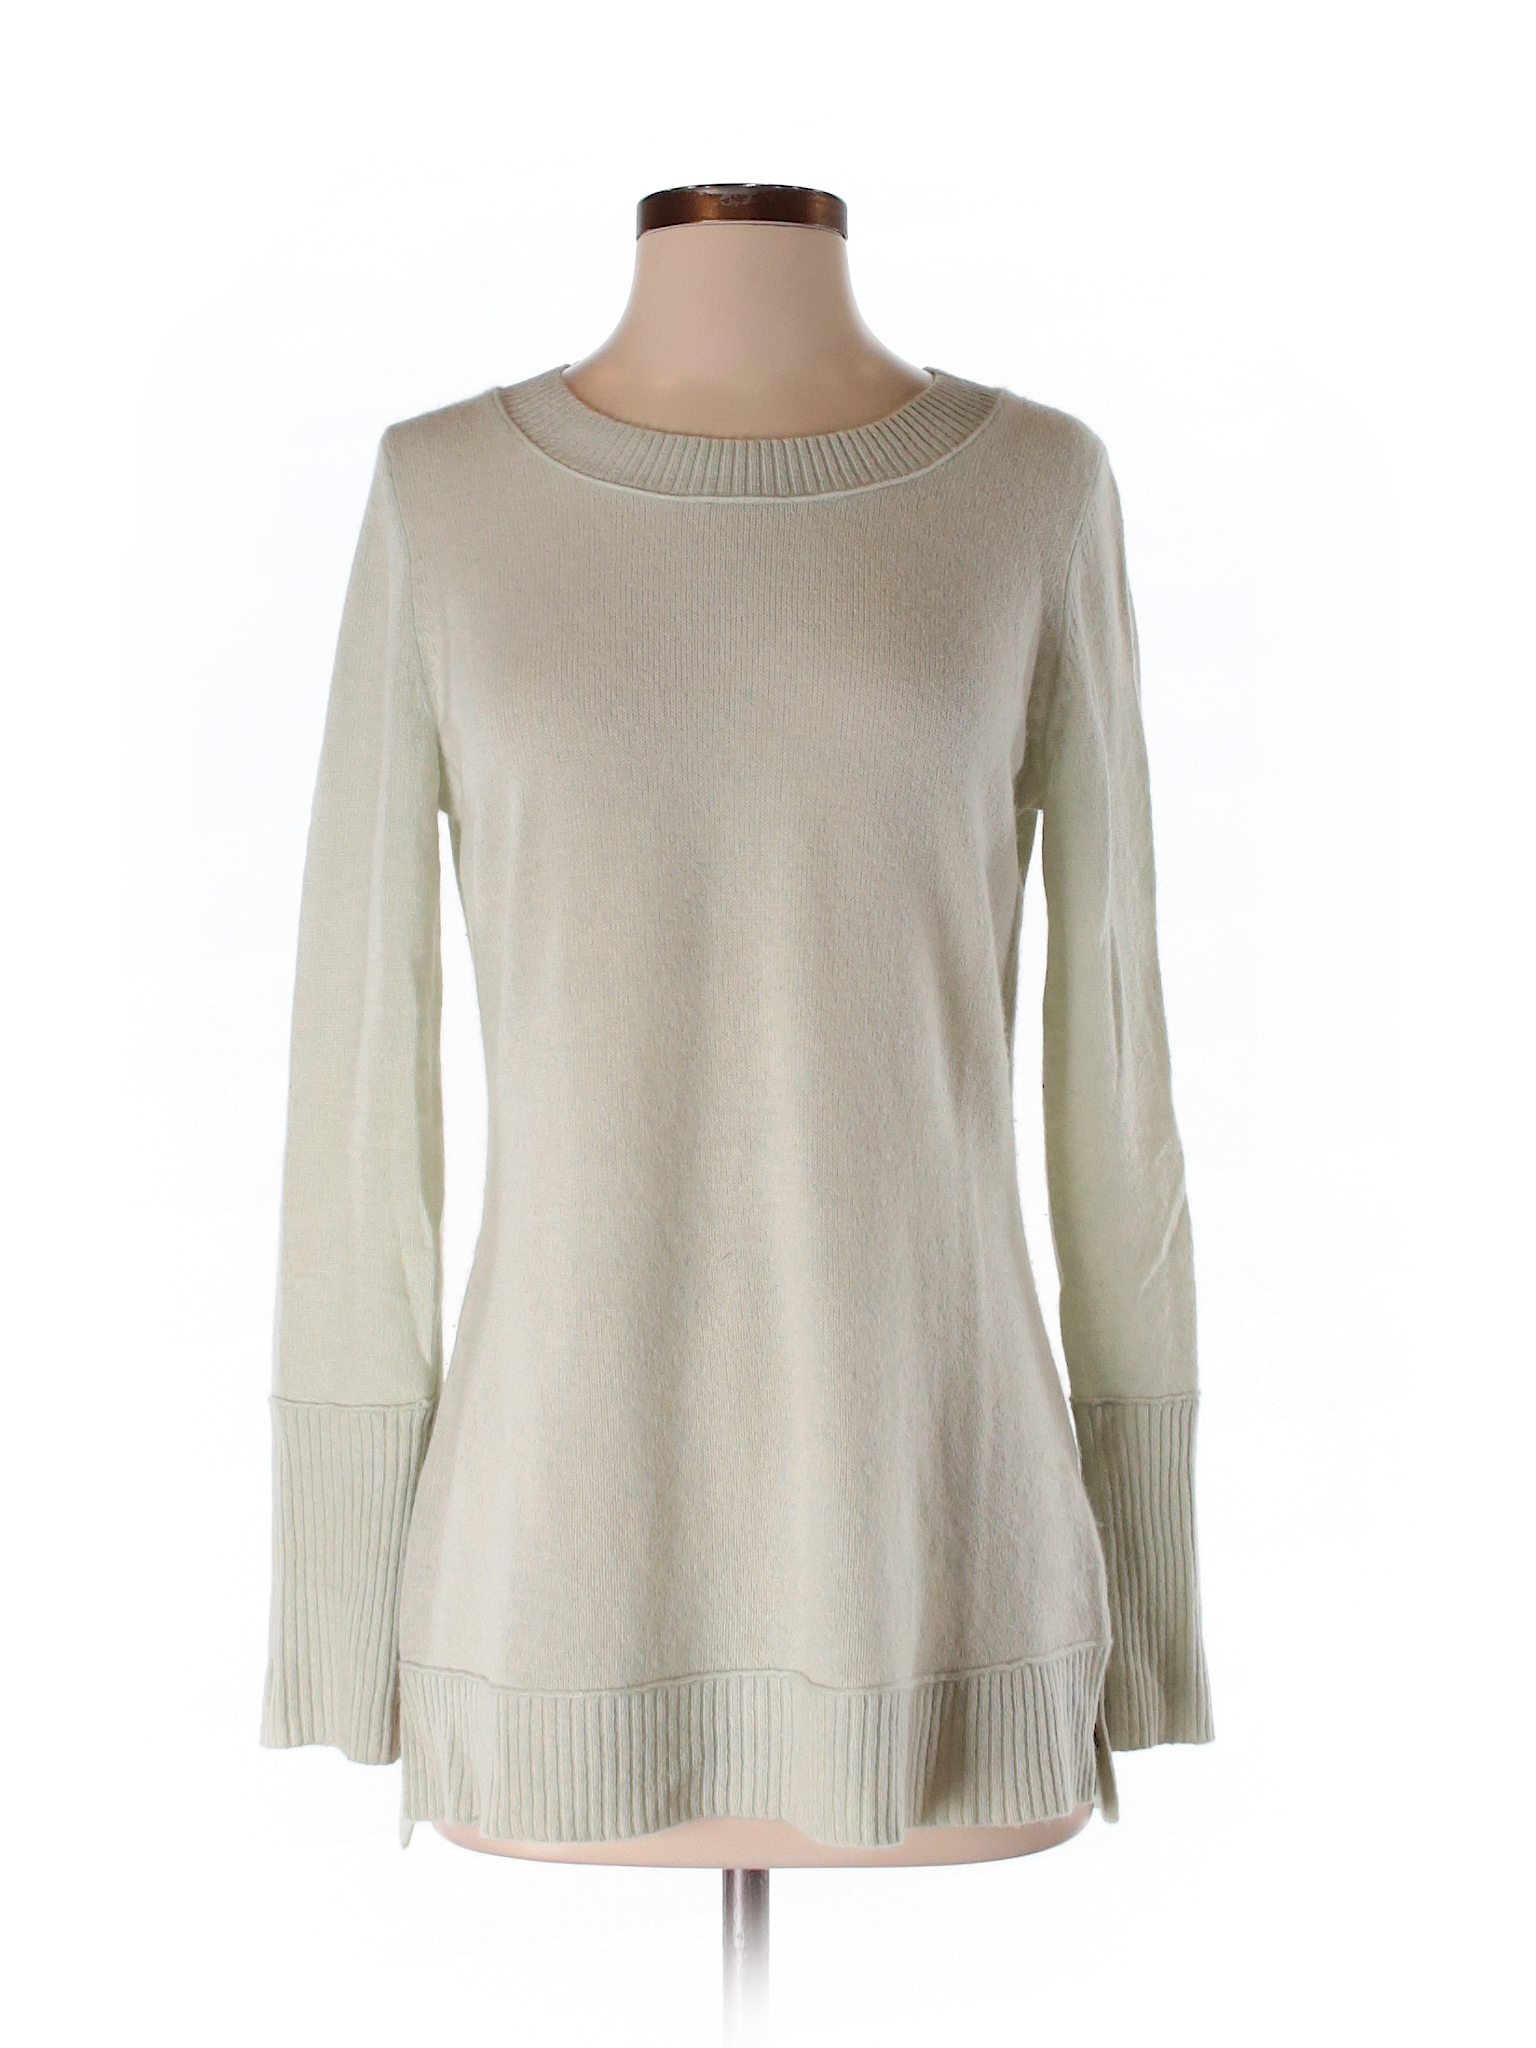 Cynthia Rowley TJX 100% Cashmere Solid Wild Willow Cashmere Pullover ...